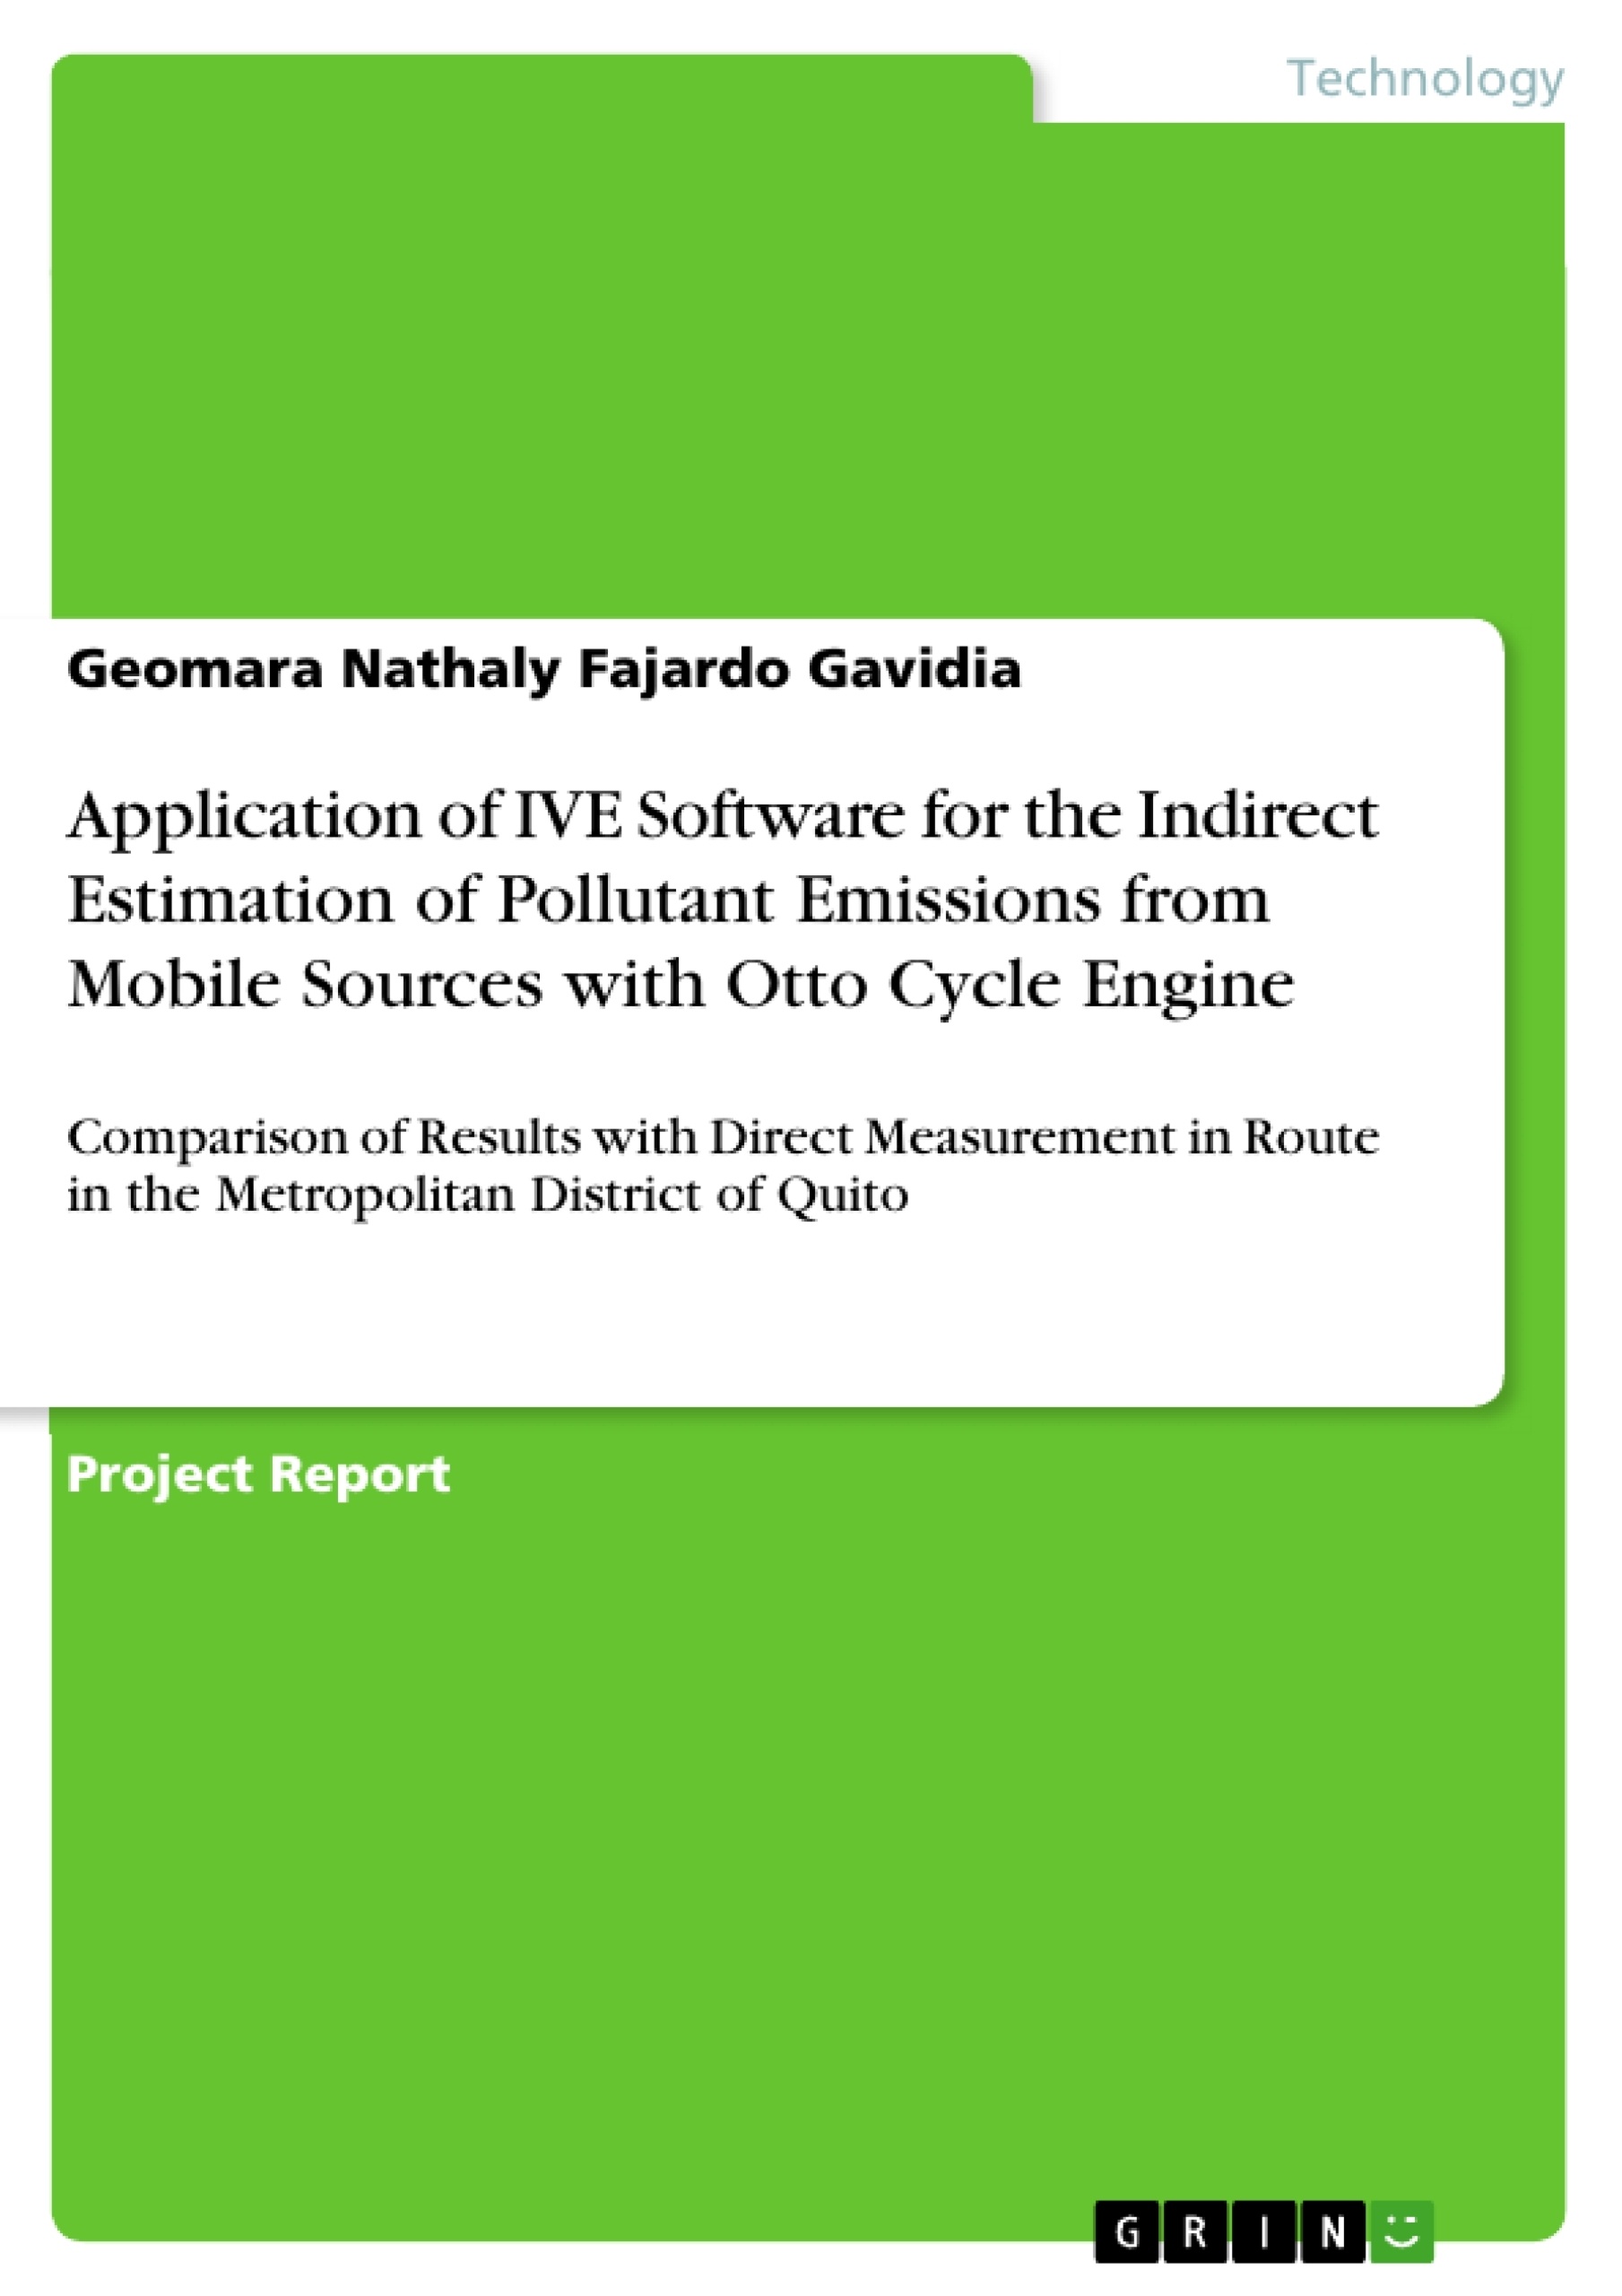 Title: Application of IVE Software for the Indirect Estimation of Pollutant Emissions from Mobile Sources with Otto Cycle Engine